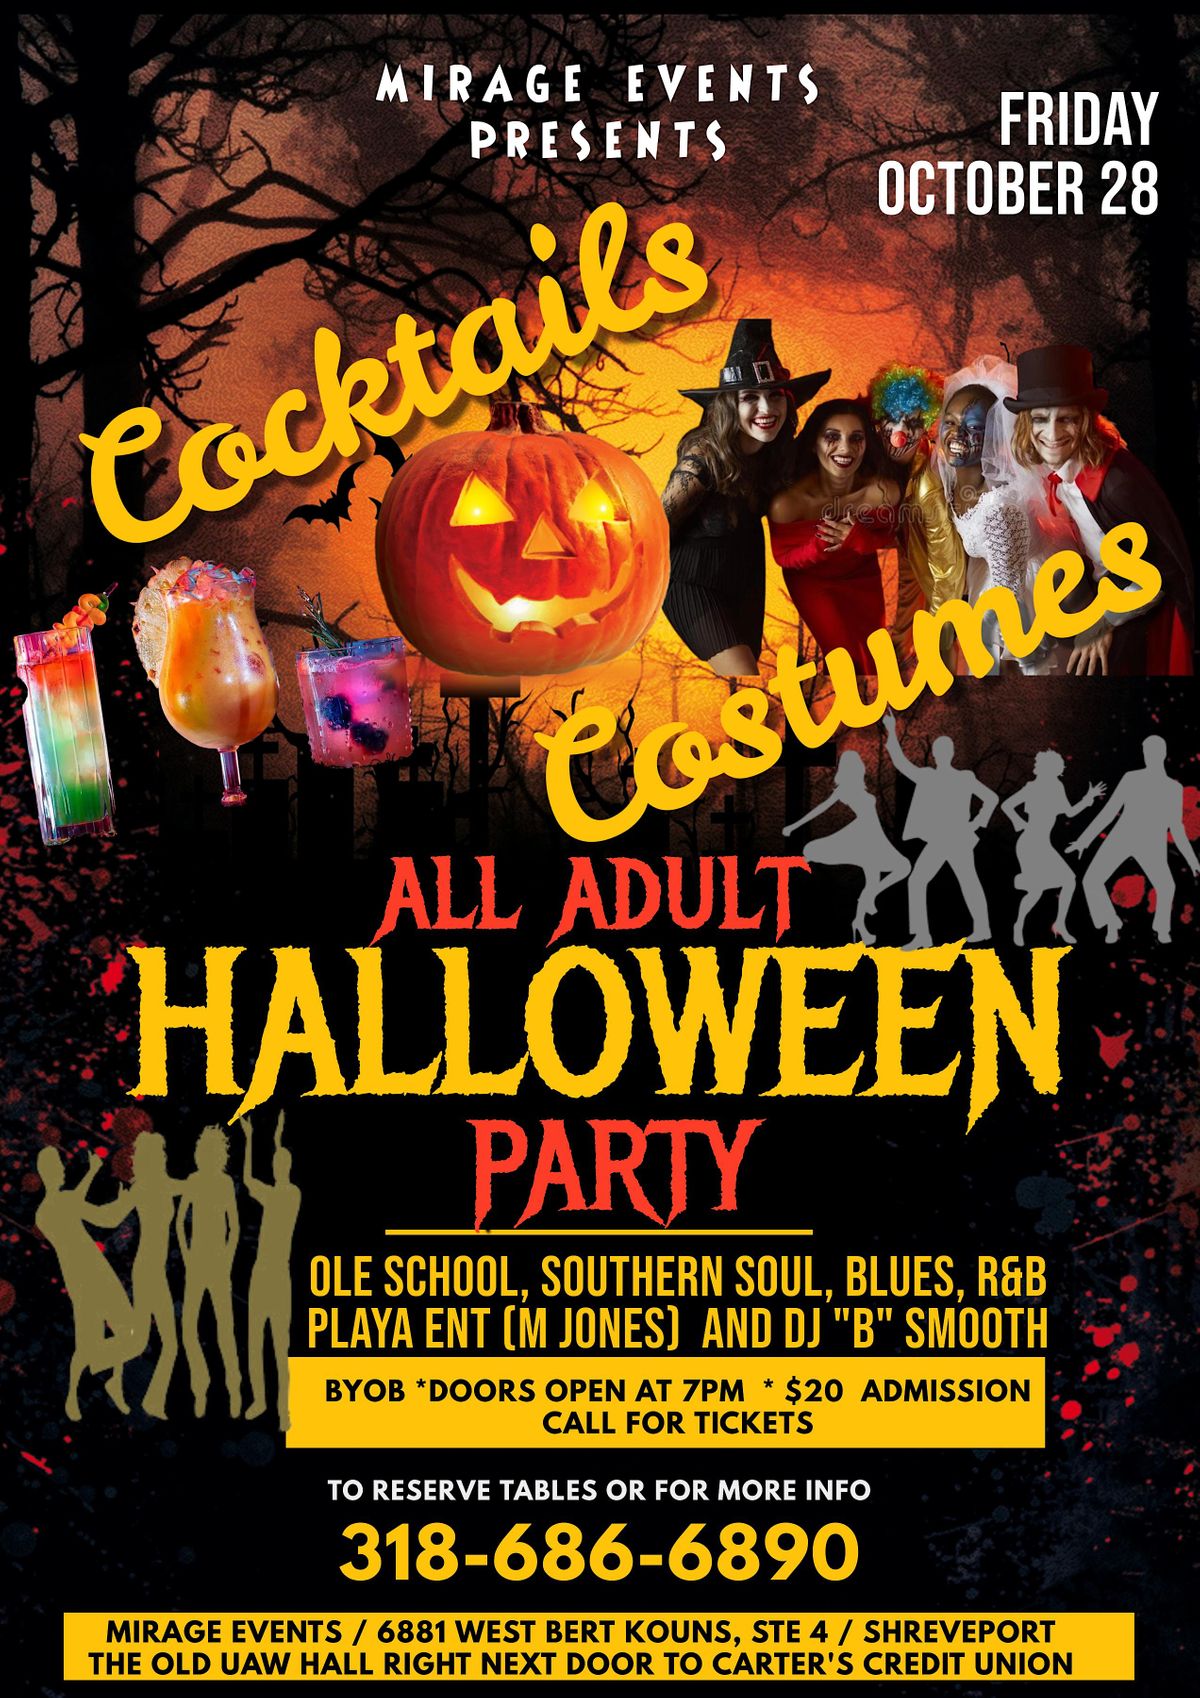 Costumes and Cocktails All Adult Halloween Party Mirage Events Center